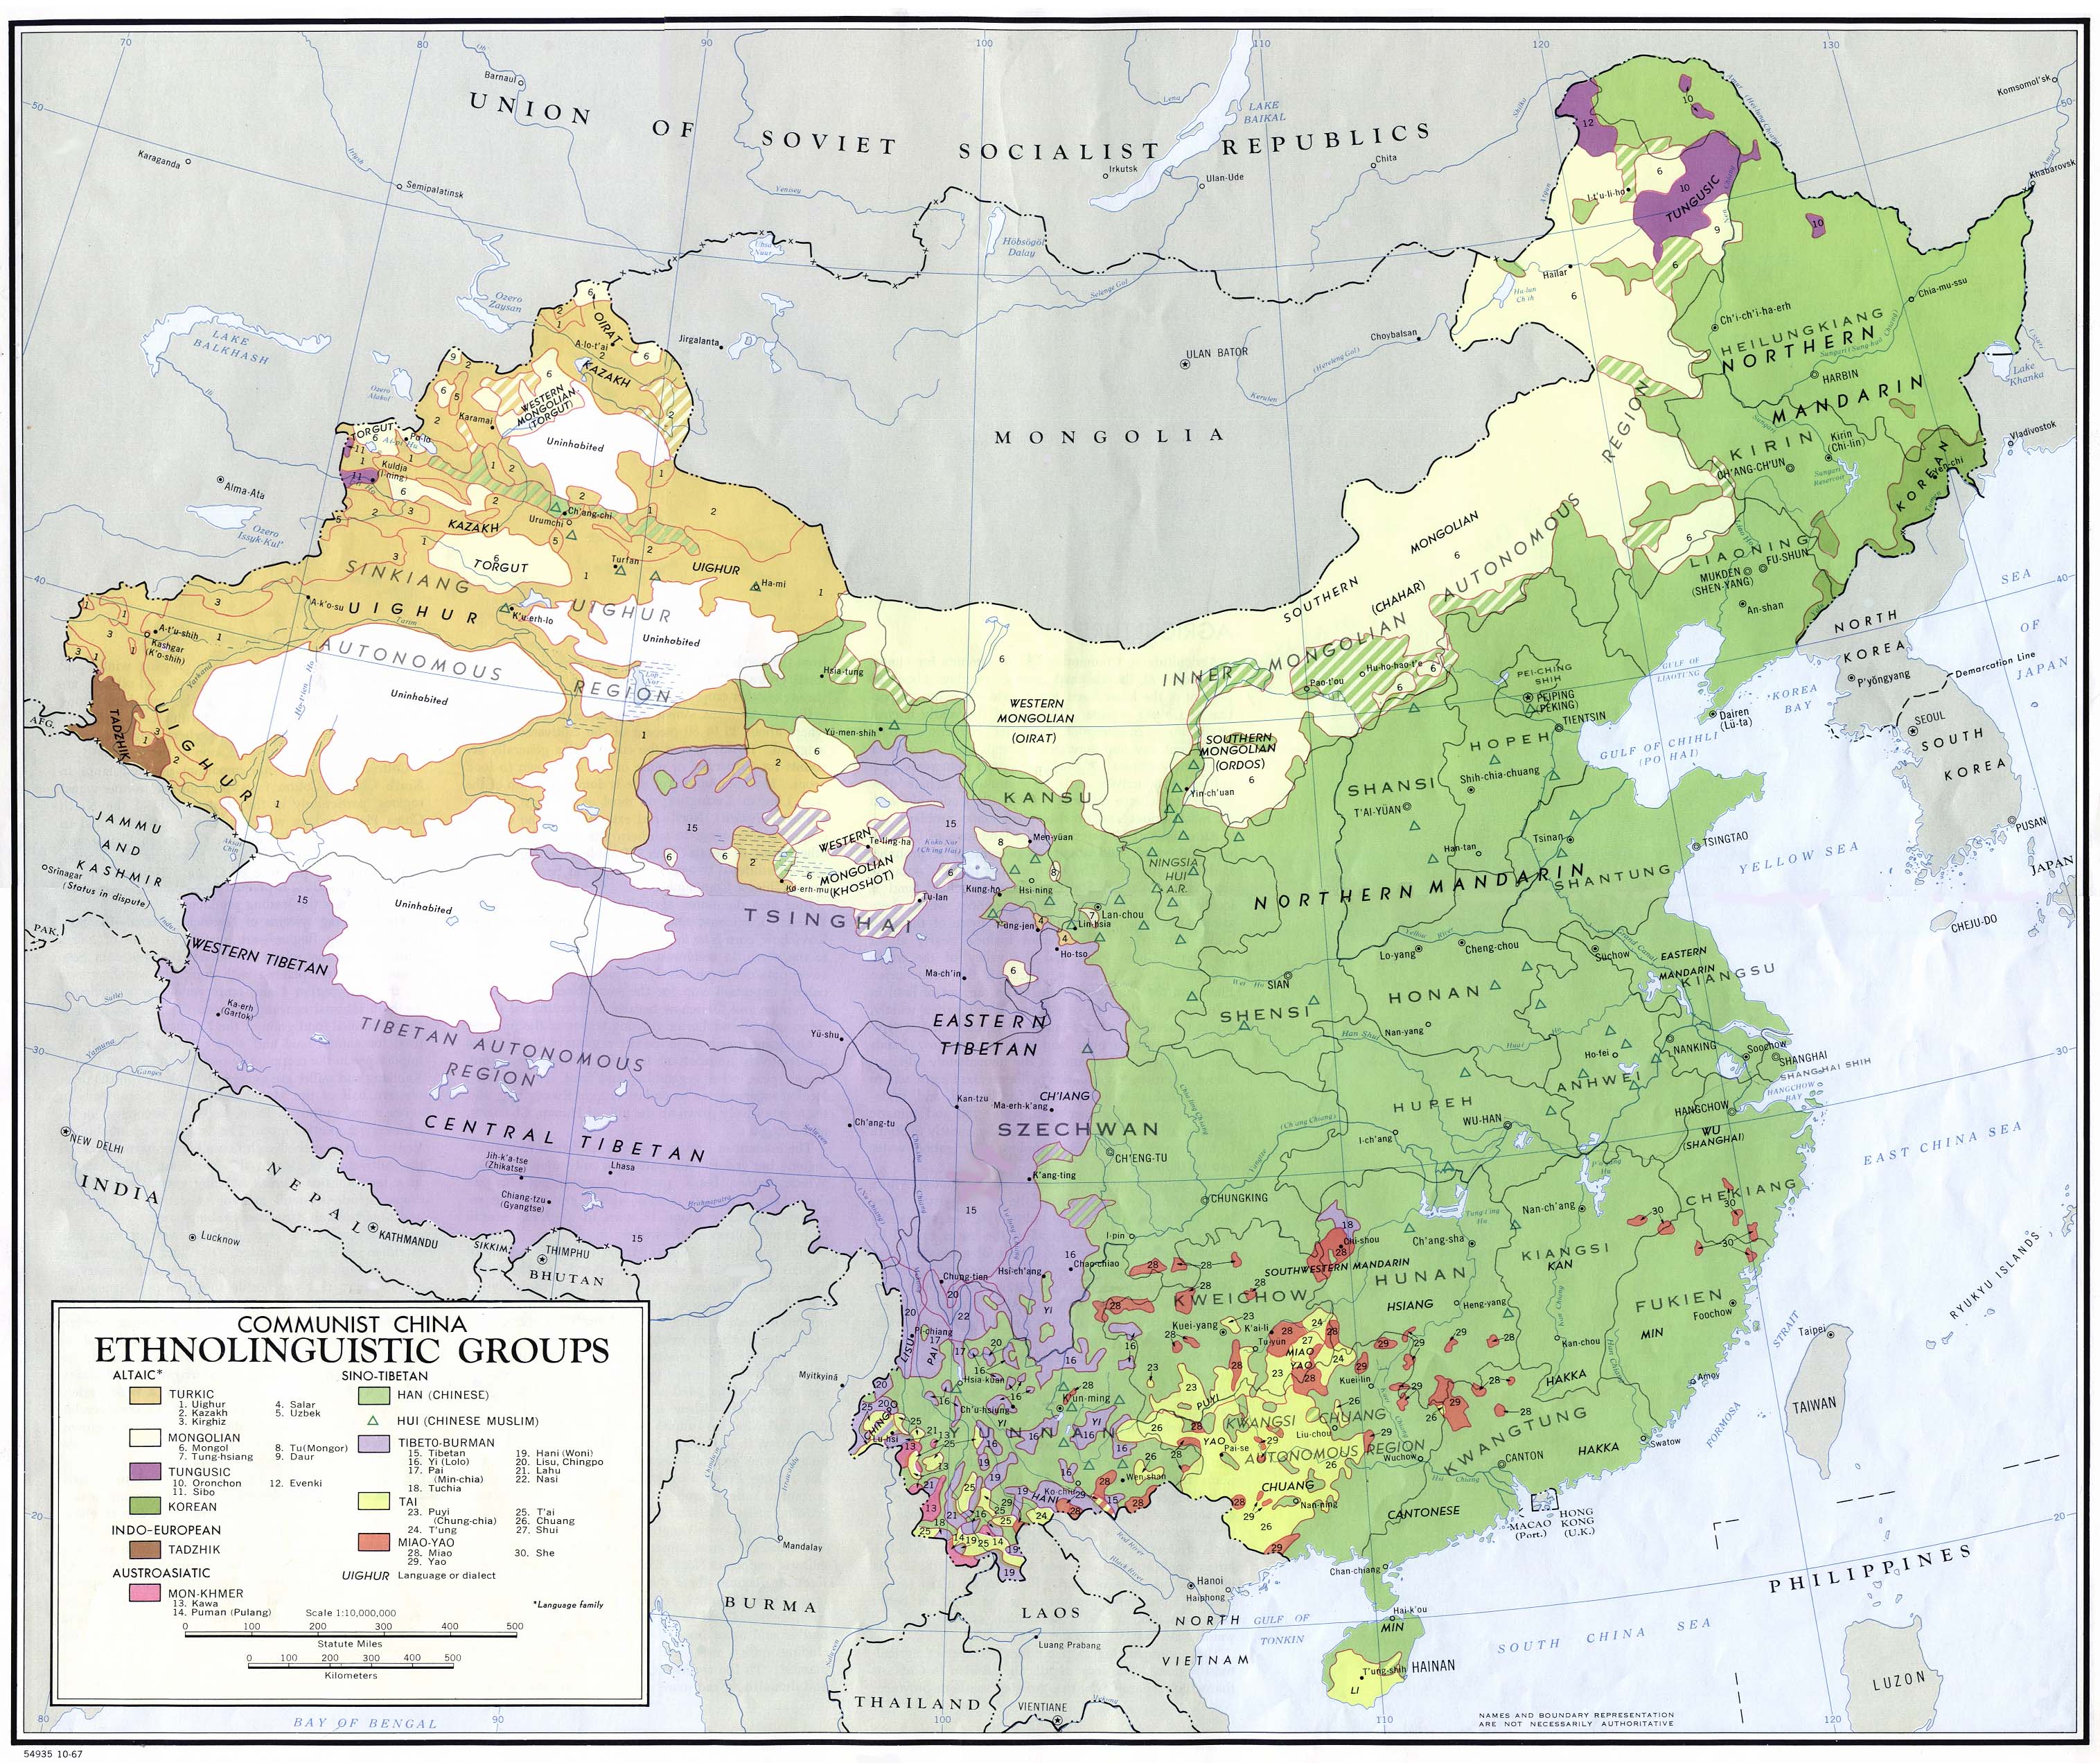 This 1967 map shows four main ethnolinguistic groups with several subcategories living in China.